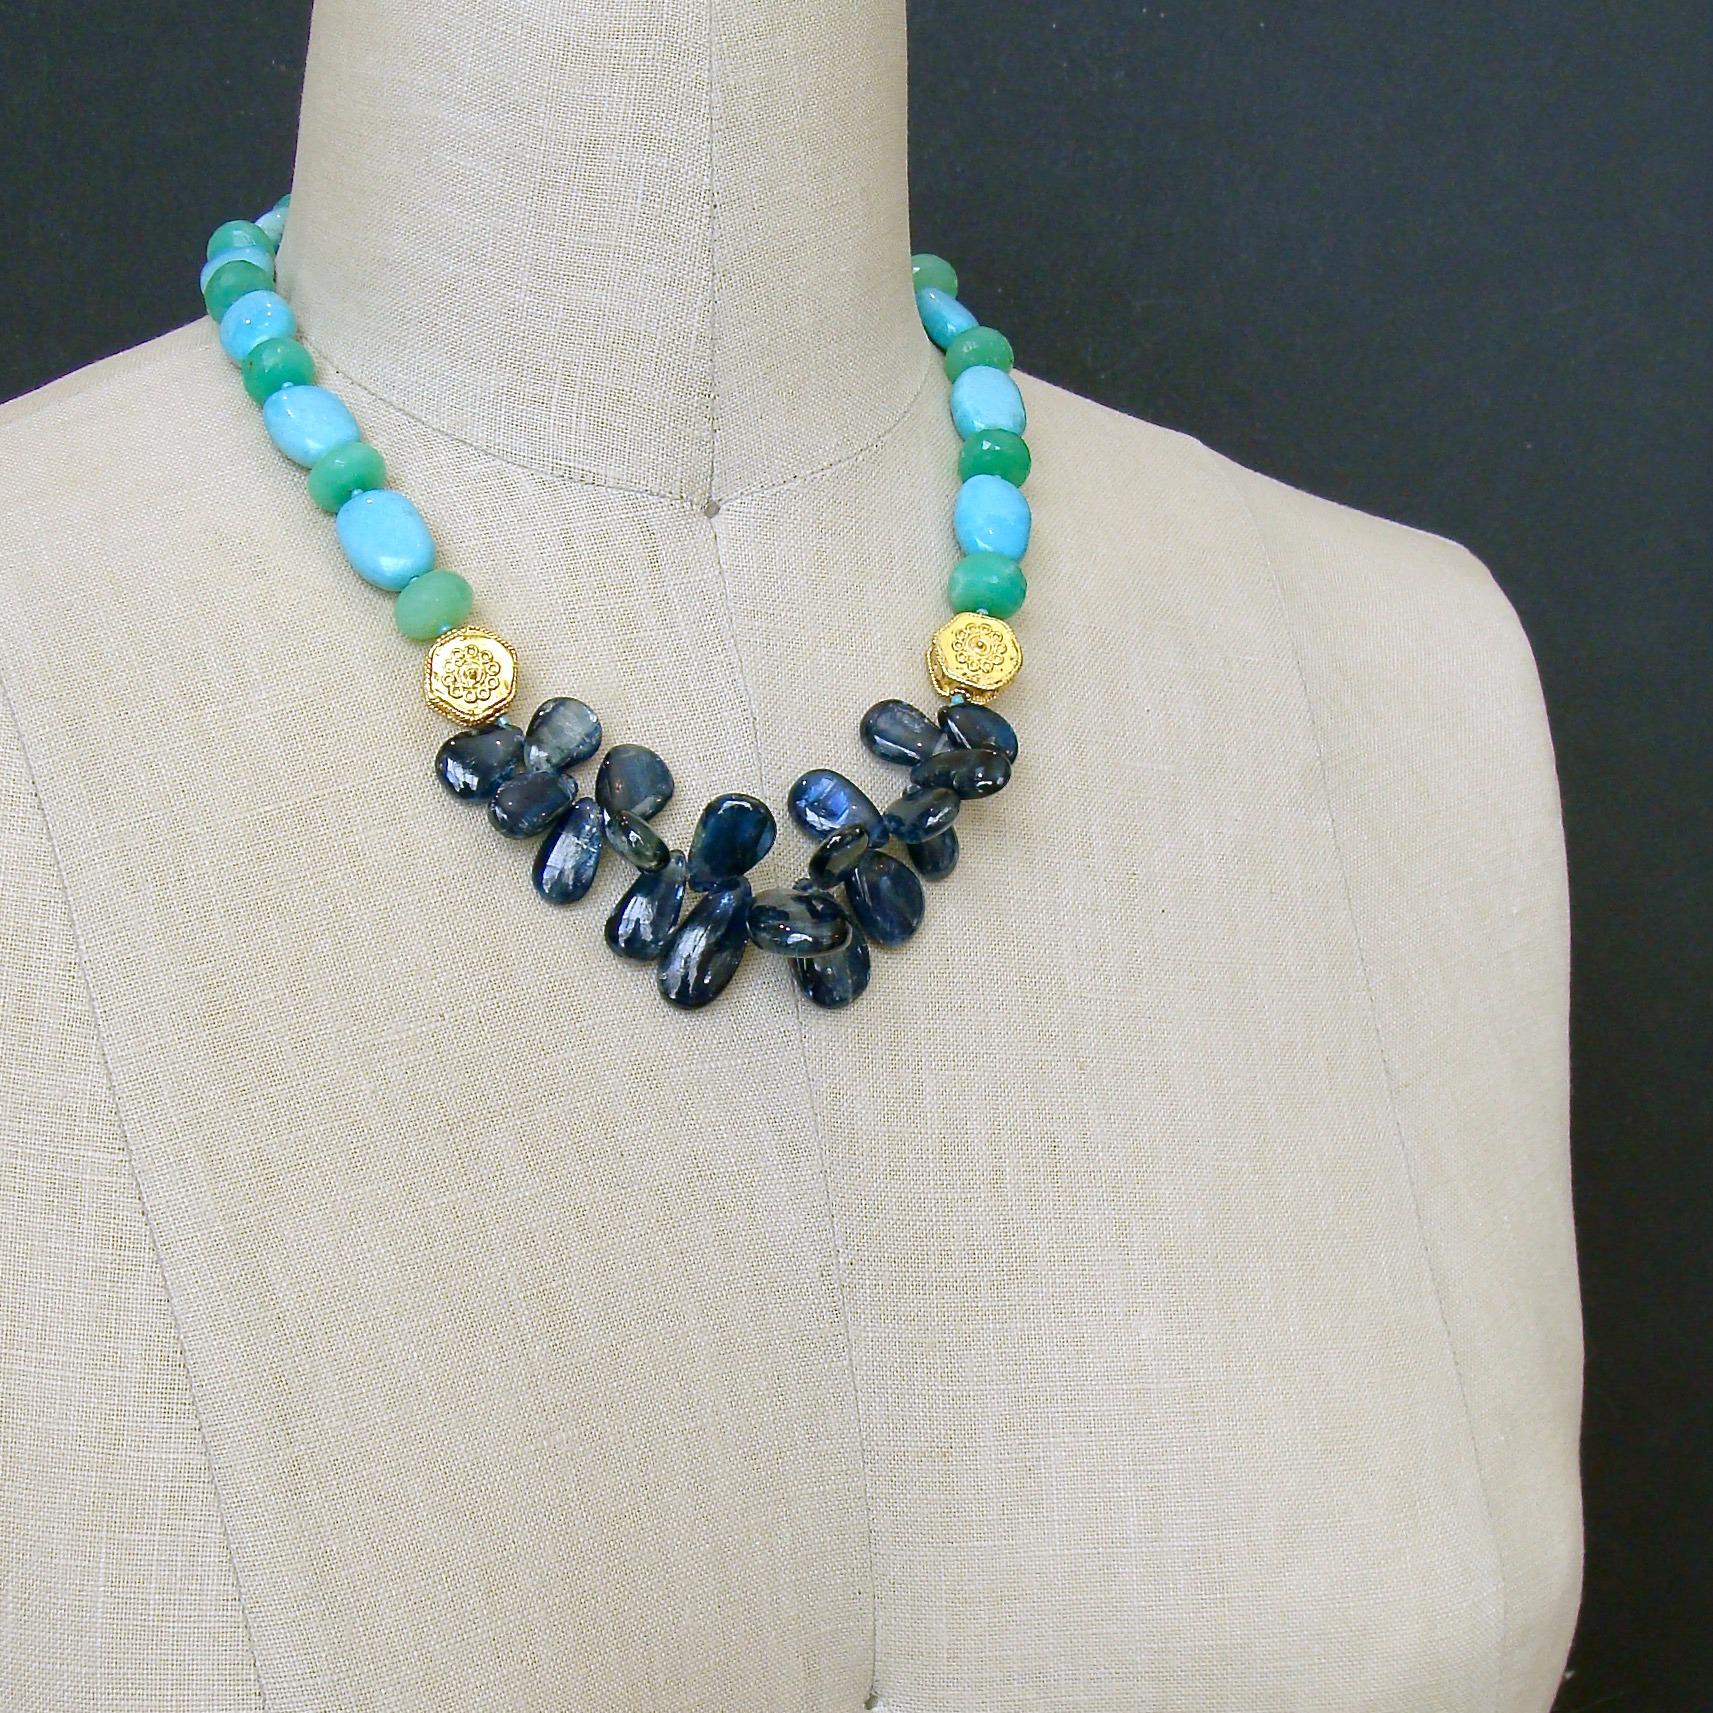 Women's Kyanite Turquoise and Chrysoprase Statement Necklace, Lala II Necklace